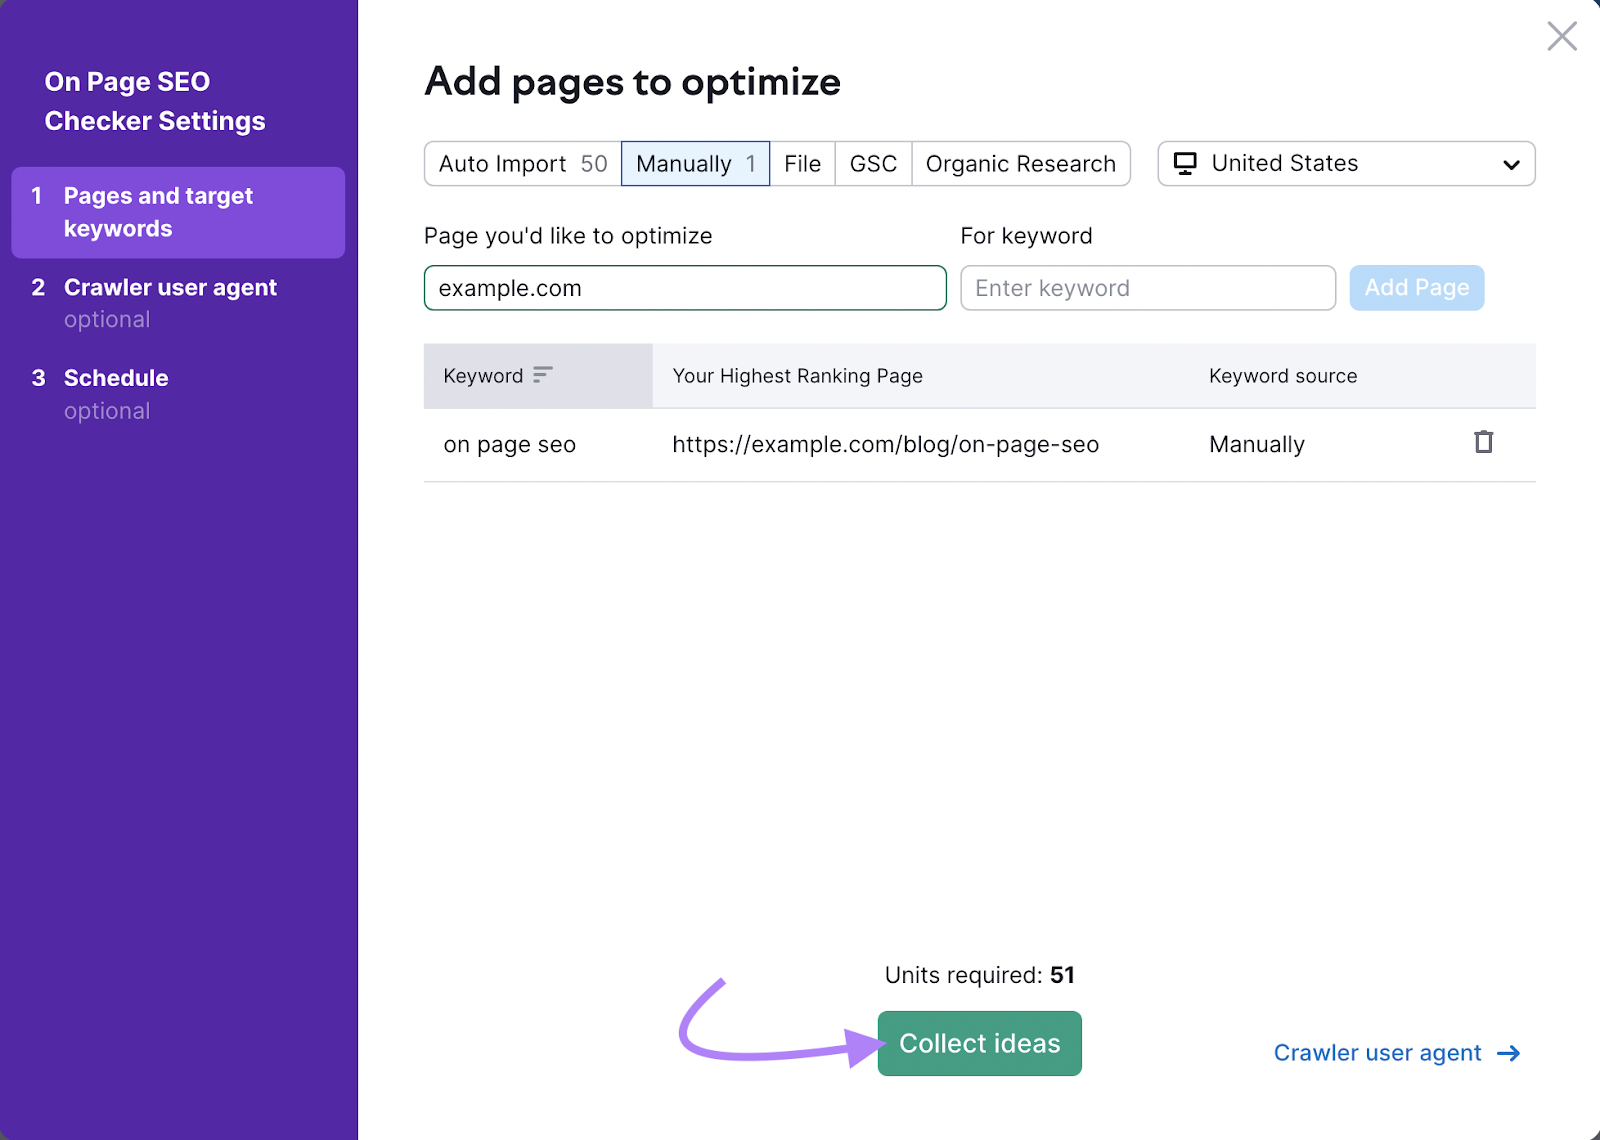 “Add pages to optimize” screen with "Collect ideas" button highlighted